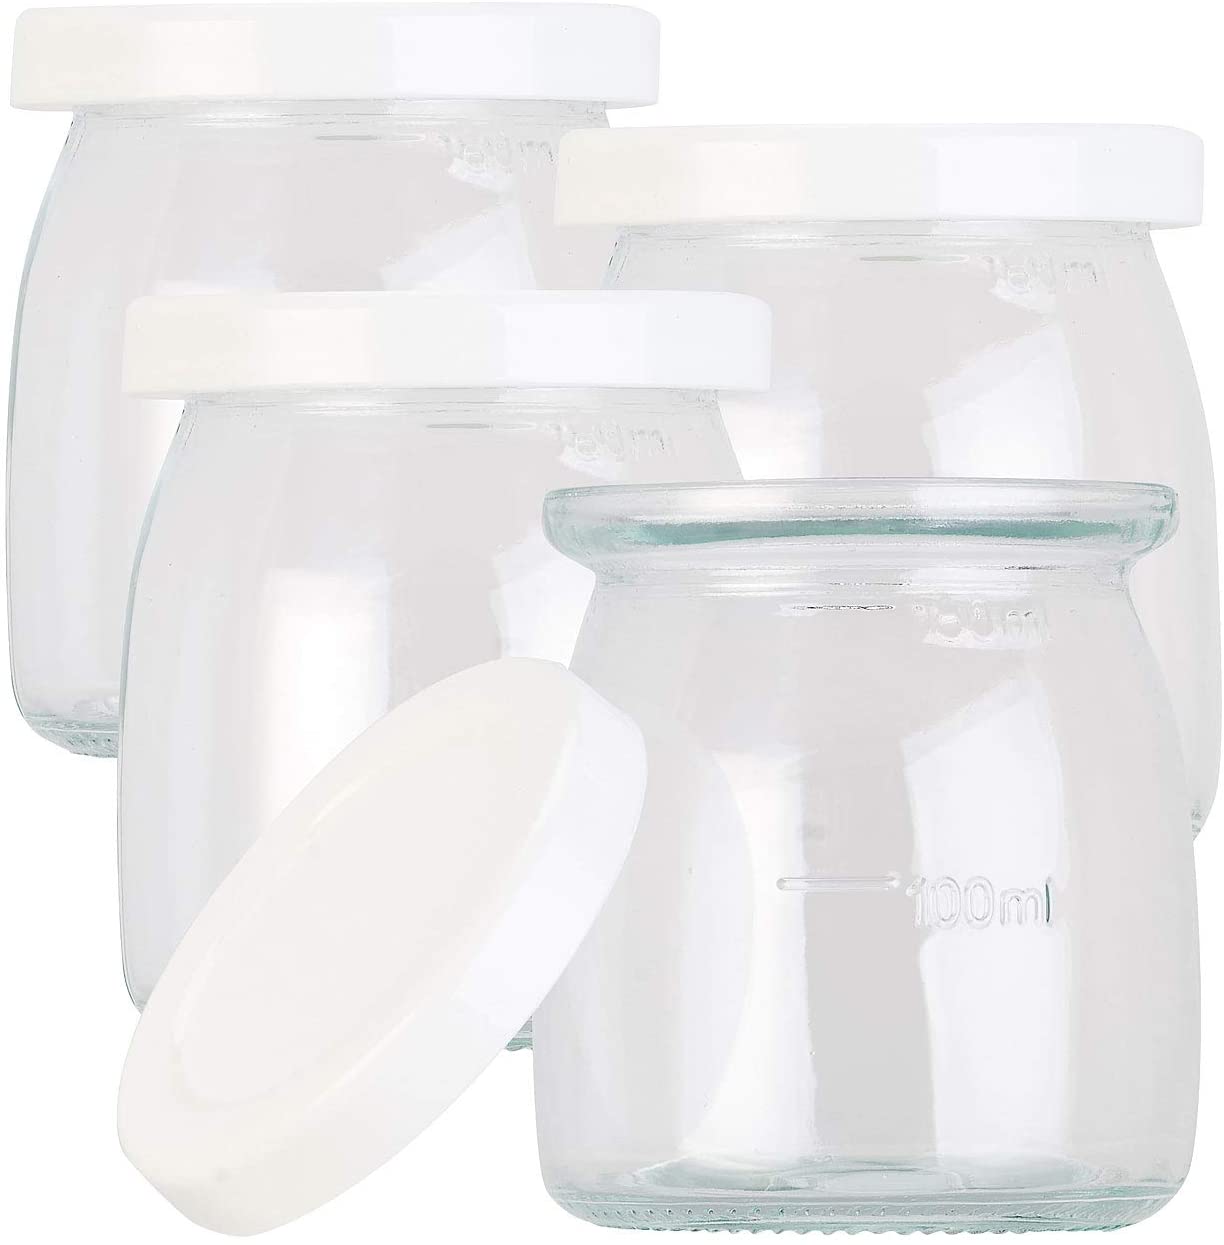 Rosenstein & Söhne Accessories for Yoghurt Machines: Set of 4 Replacement Jars with Lids for Yoghurt Maker JM-200/300, 180 ml each (Yoghurt Devices)